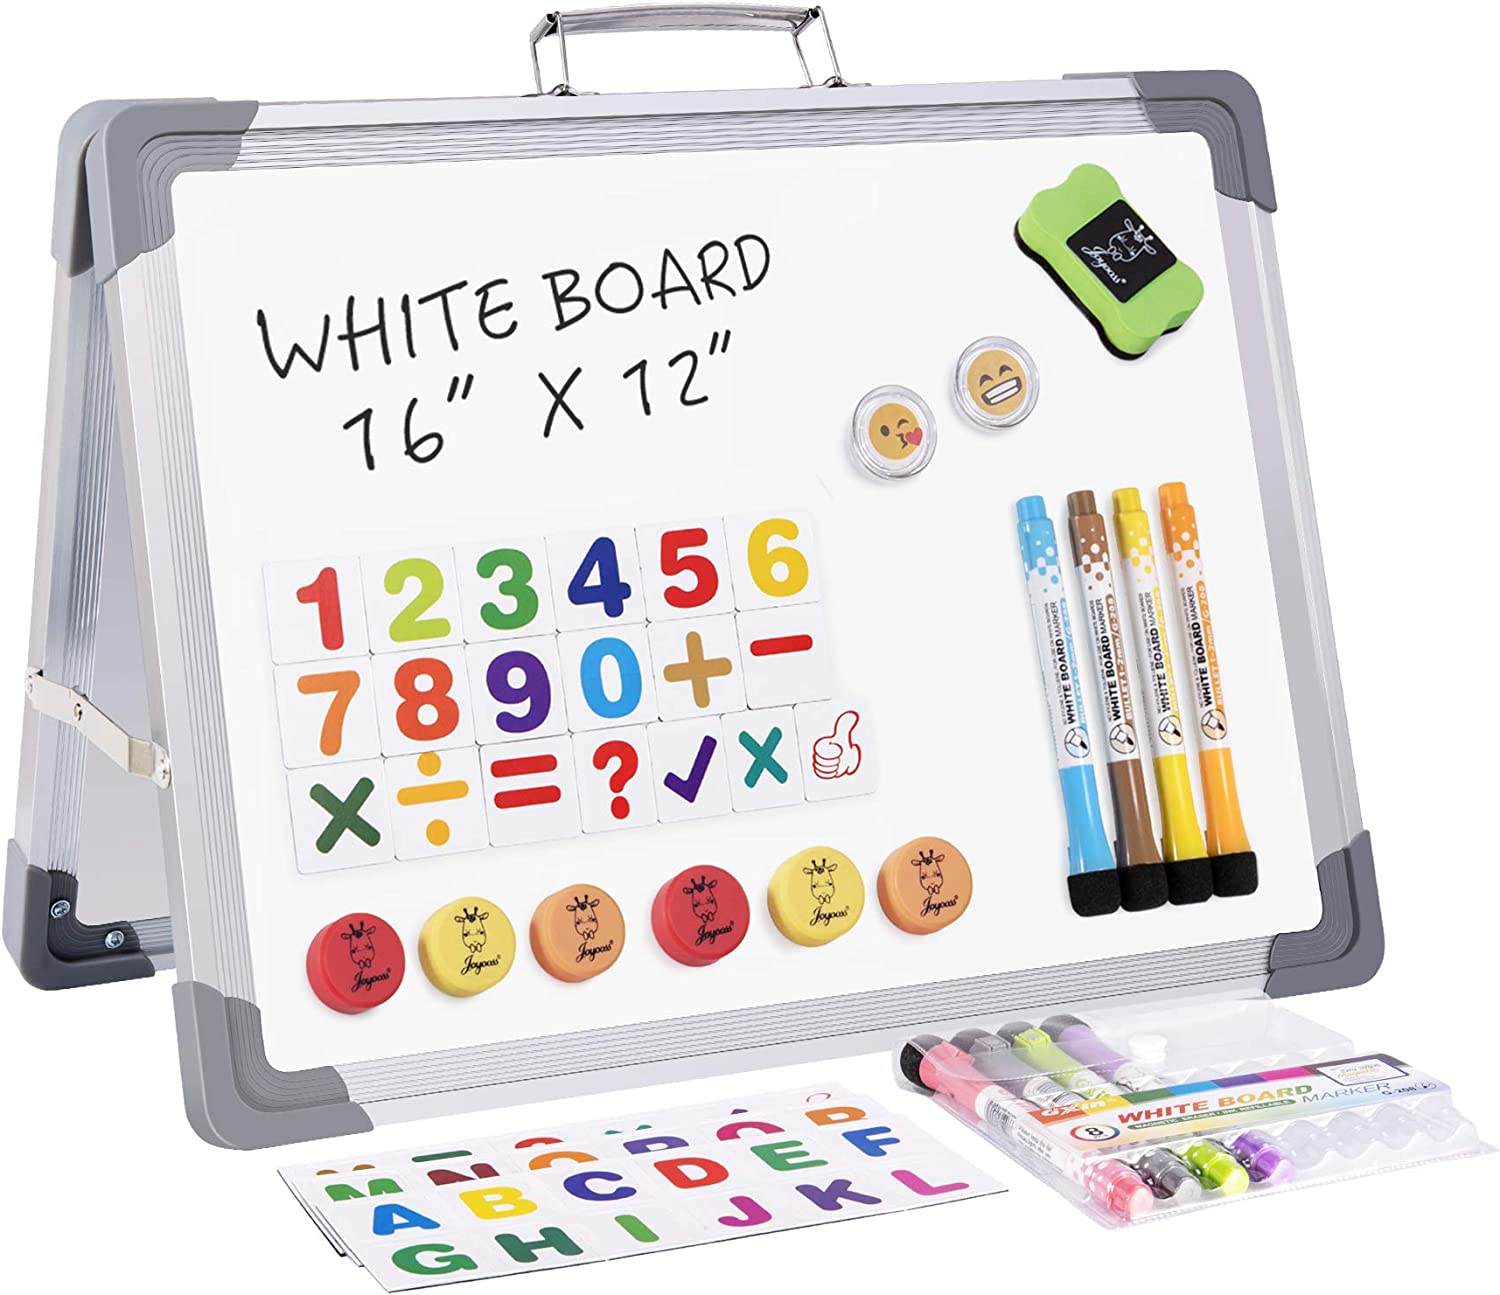 JOYOOSS Magnetic Small Dry Erase Whiteboard, 16” x 12” Foldable Desktop Portable Whiteboard Easel with Magnet Markers Eraser for Home, Office & School